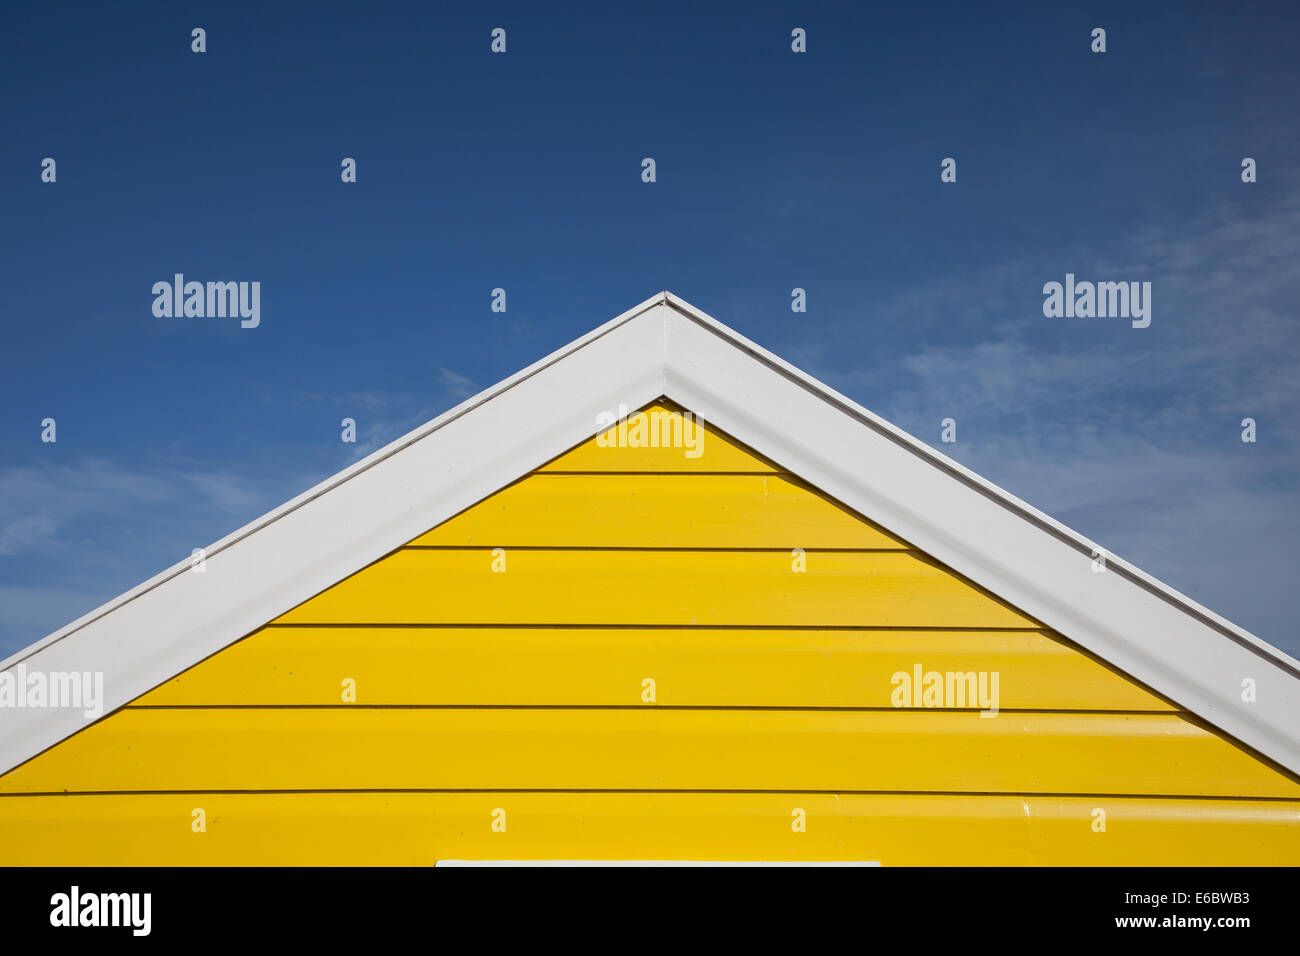 Yellow beach hut against blue sky, the roof apex is pointing up into the sky Stock Photo